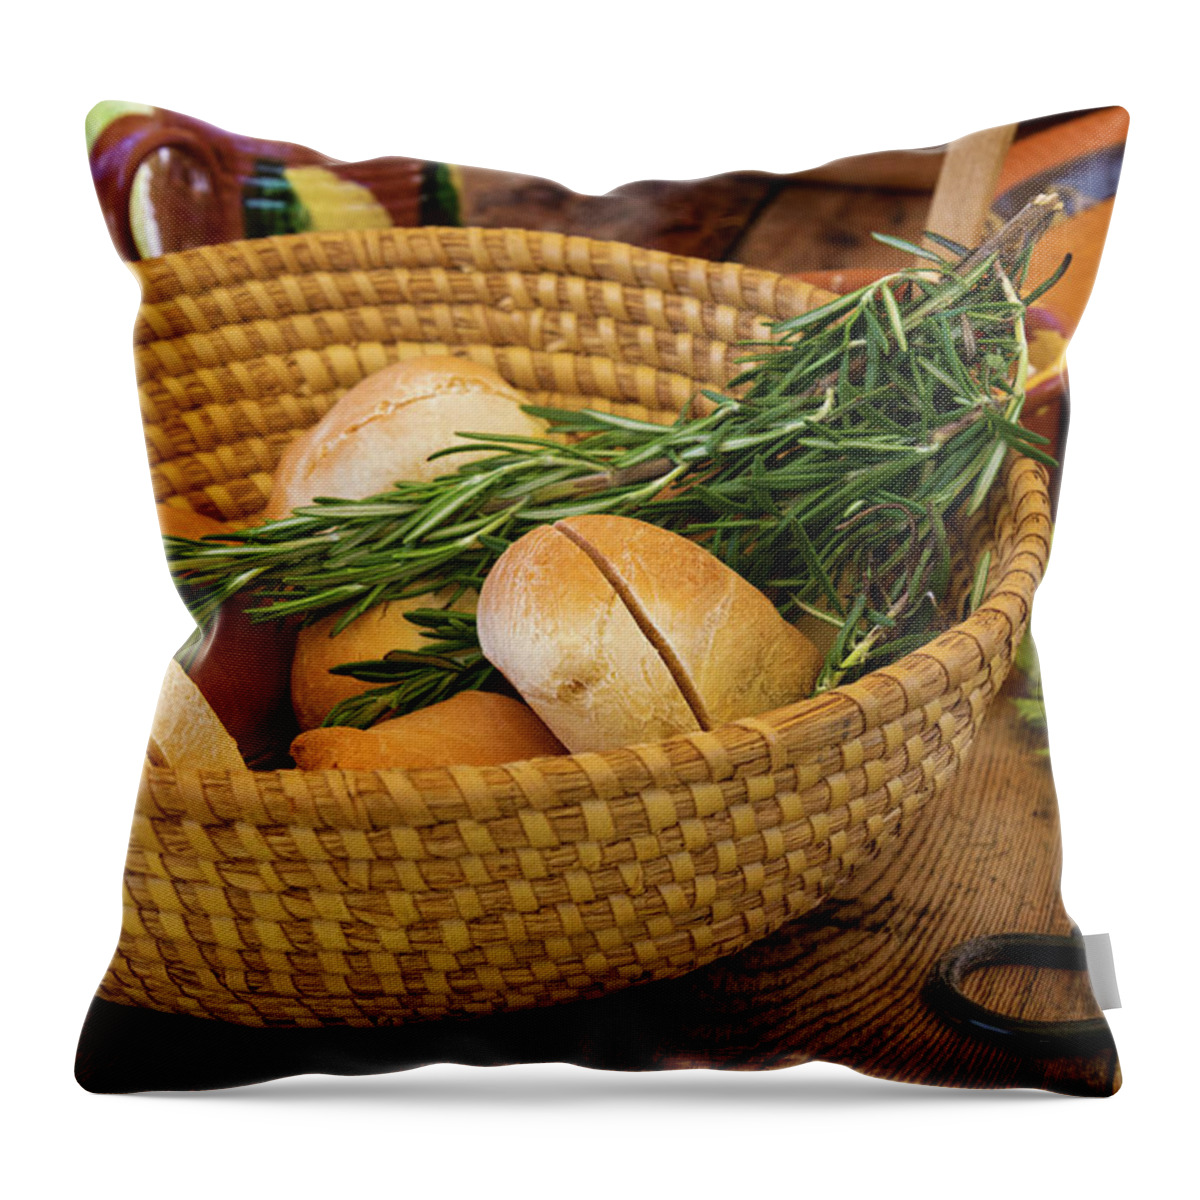 Chef Art Throw Pillow featuring the photograph Food - Bread - Rolls and Rosemary by Mike Savad